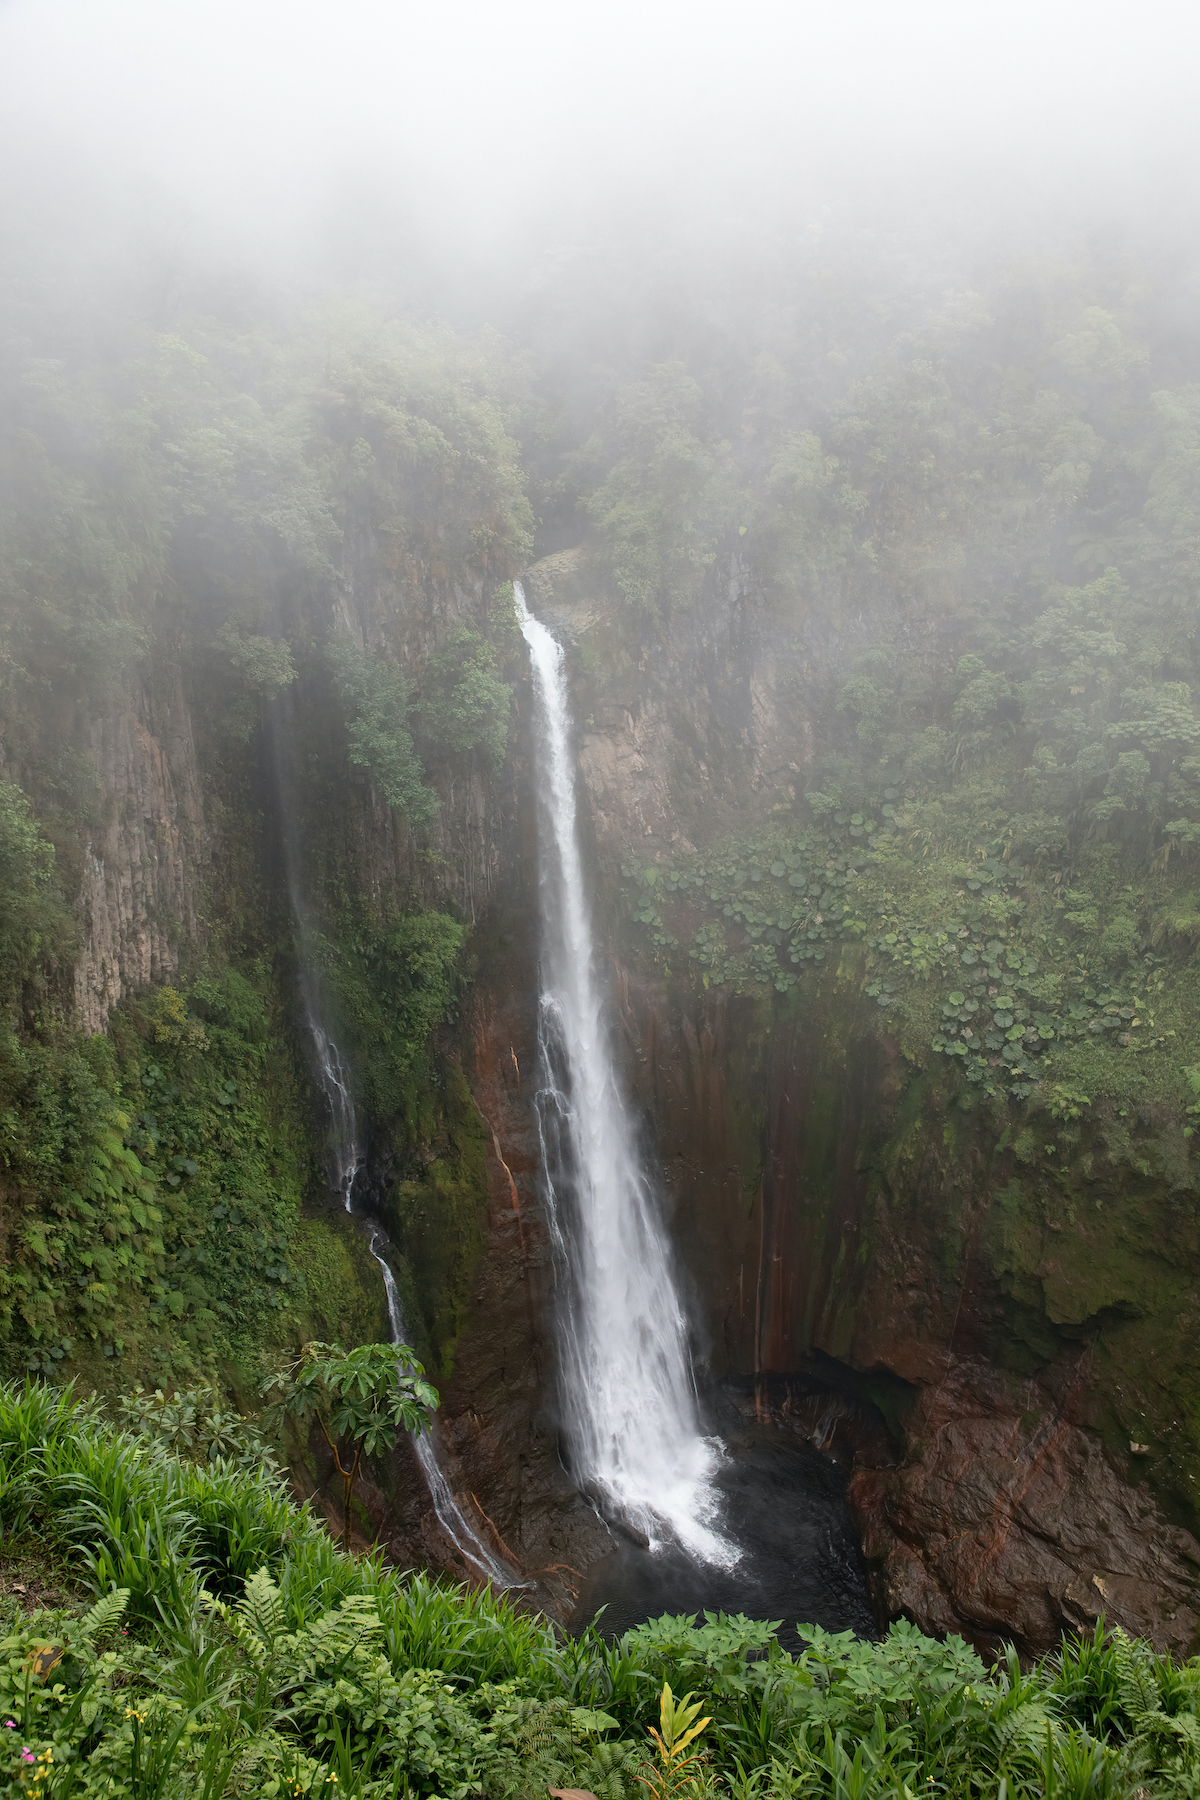 The dense forests of Costa Rica are dotted with stunning waterfalls